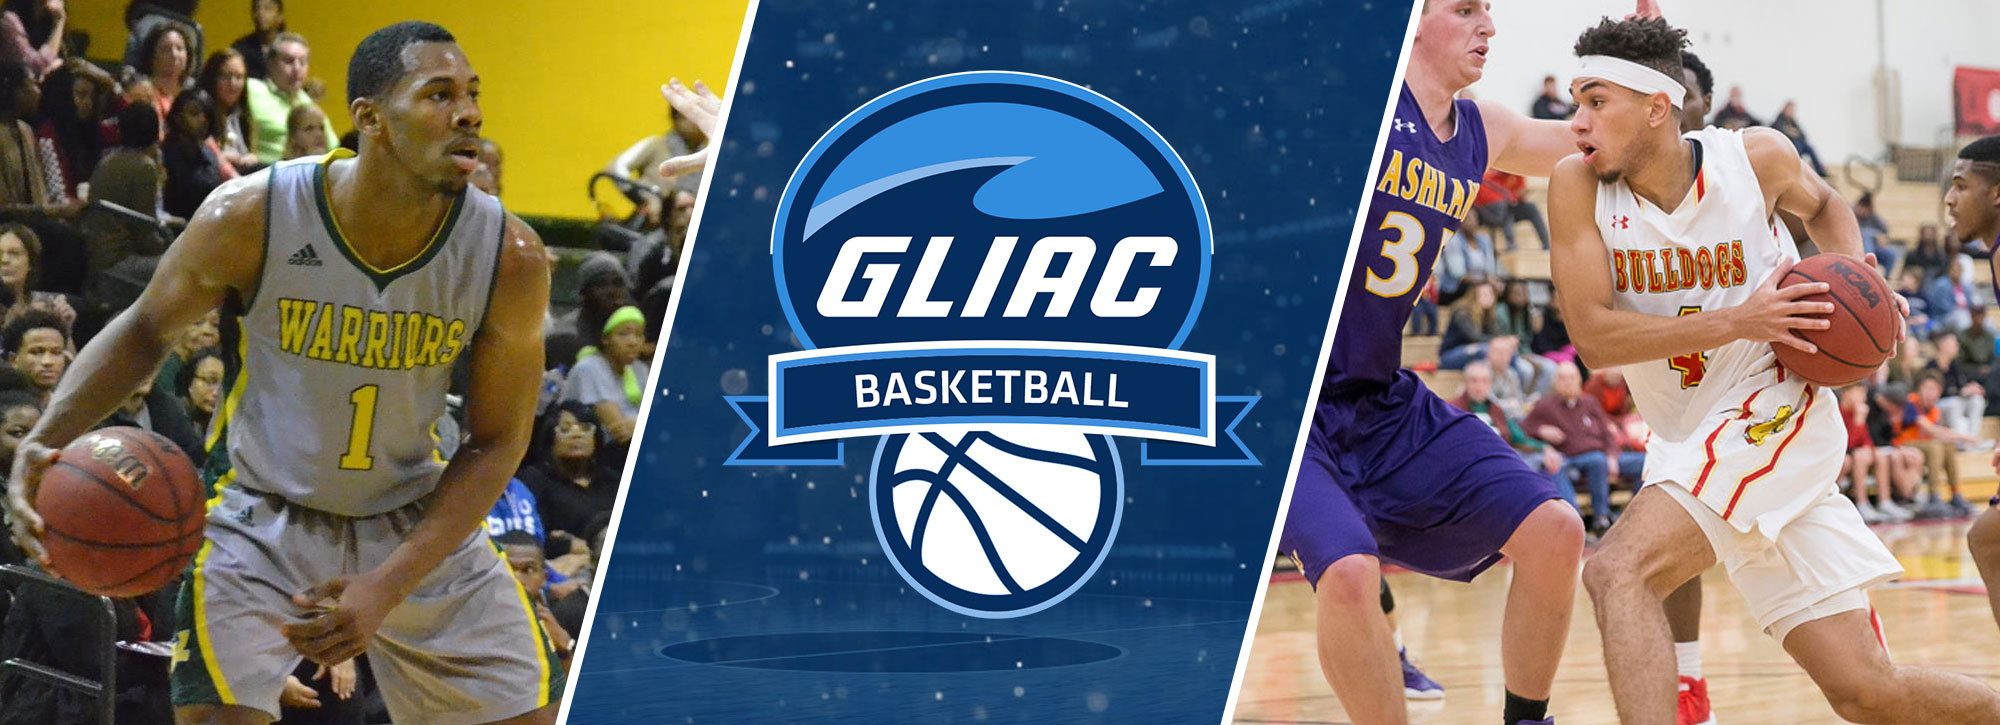 Home Teams 5-1 in #GLIACMBB Thursday Night Action